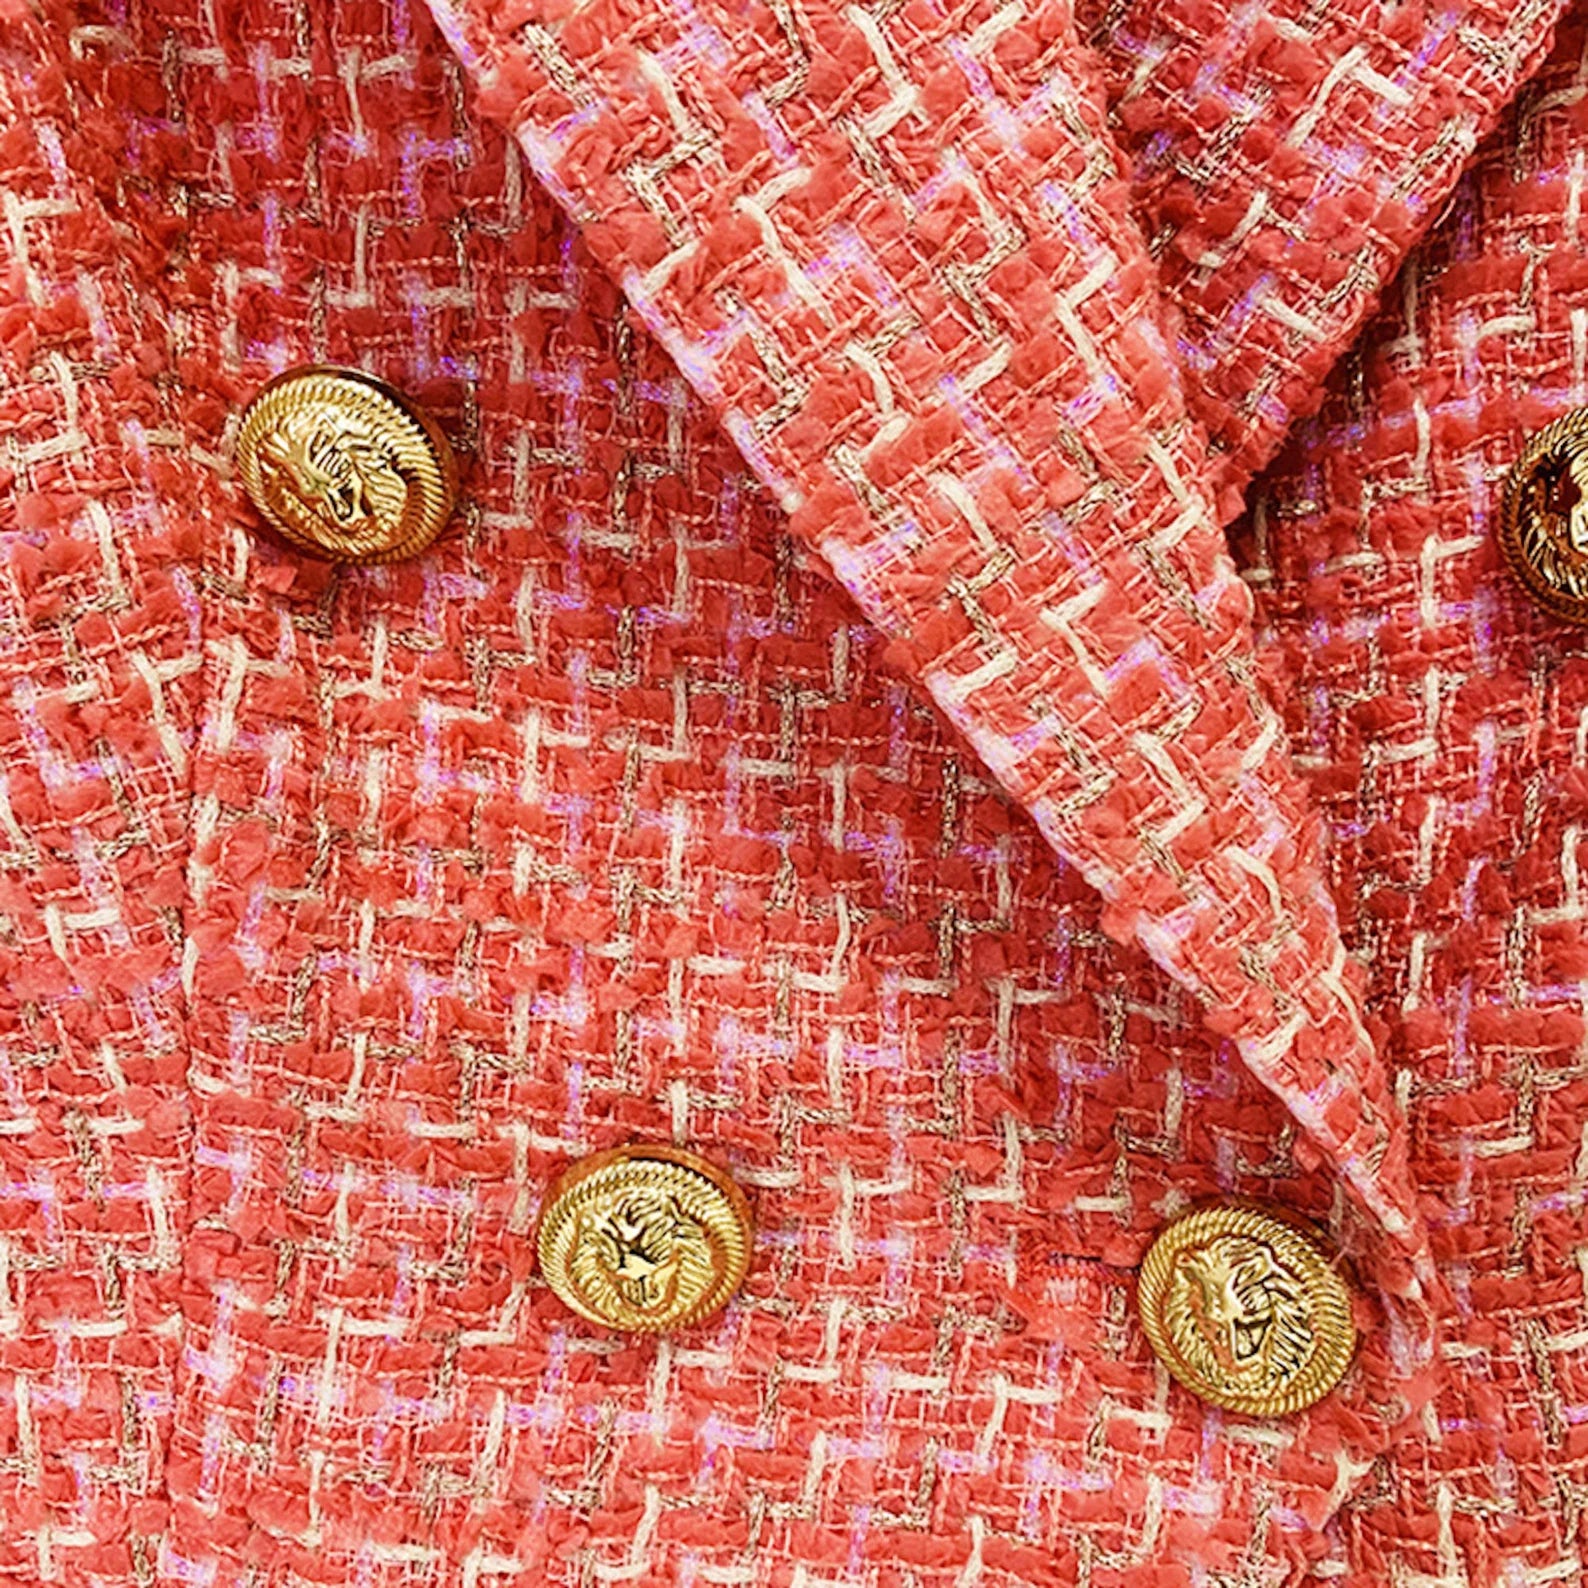 Peach Colour Luxury Women Golden Lion Buttons Tweed Jacket Blazer   Our fantastically flattering jacket is impeccably cut for the right fit and carefully designed for both shape and comfort. Our Fashionpioneer Jacket is eminently versatile, with an attractive peach colour that frames the face, pocket trims, and collar accents. 